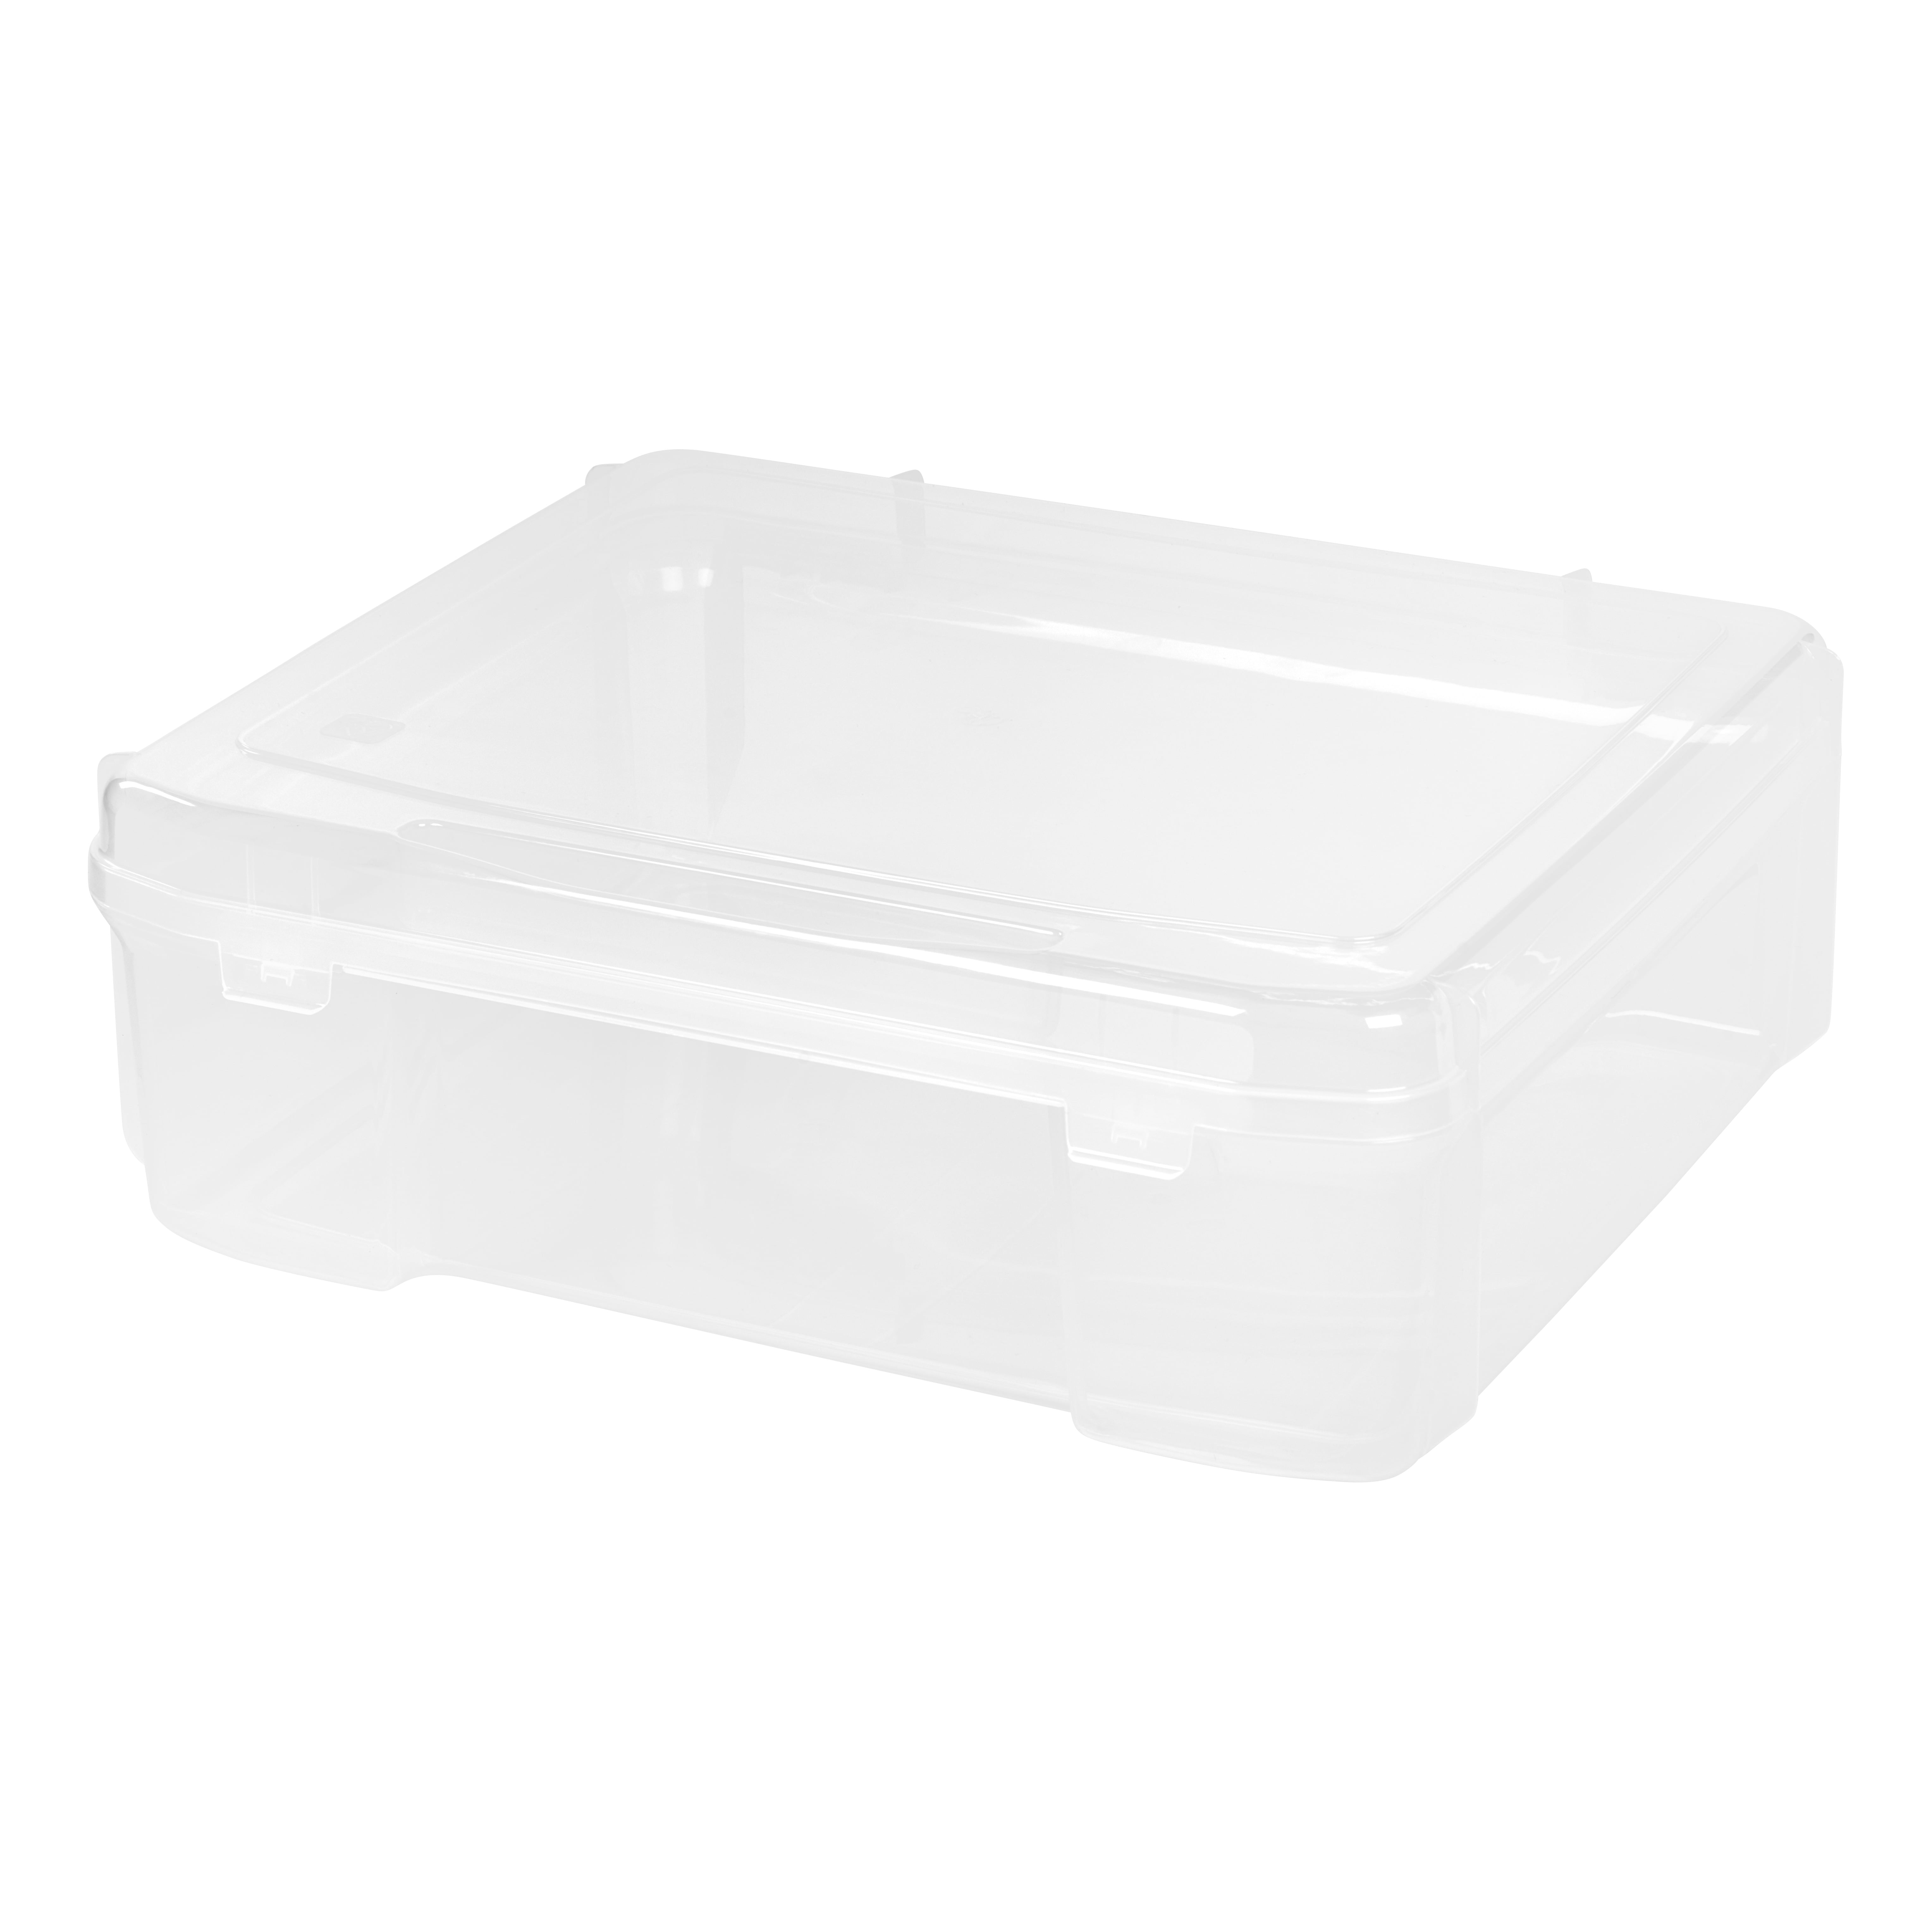 IRIS Portable Project Cases With Handles 24 58 x 17 78 x 15 78 Clear Pack  Of 4 Cases - Office Depot